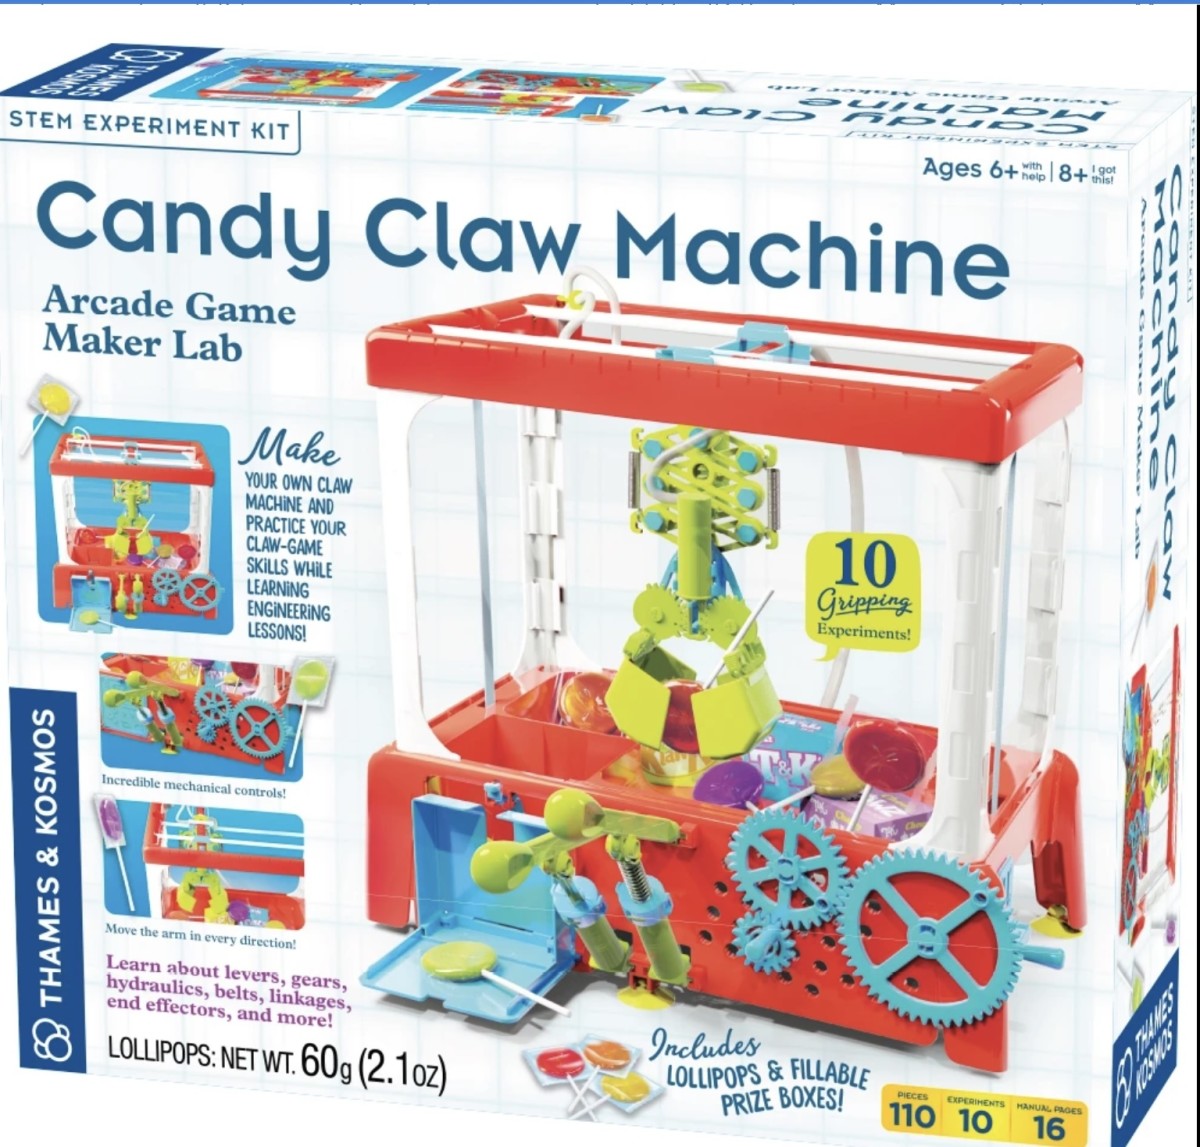 Grab The Fun With The Candy Claw Machine - Arcade Game Maker Lab